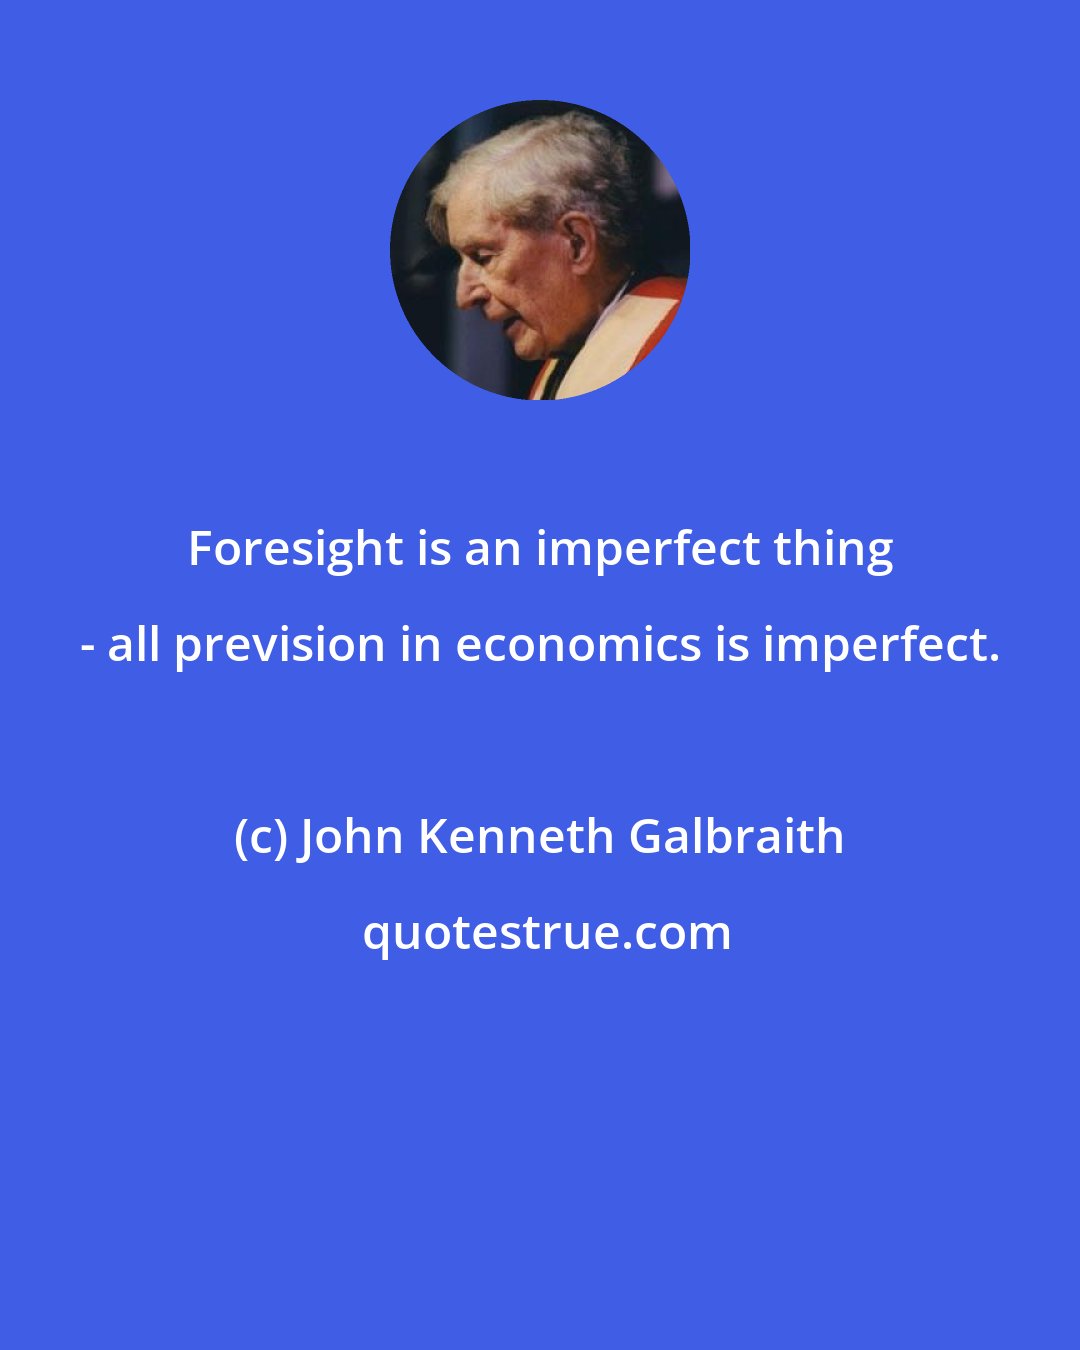 John Kenneth Galbraith: Foresight is an imperfect thing - all prevision in economics is imperfect.